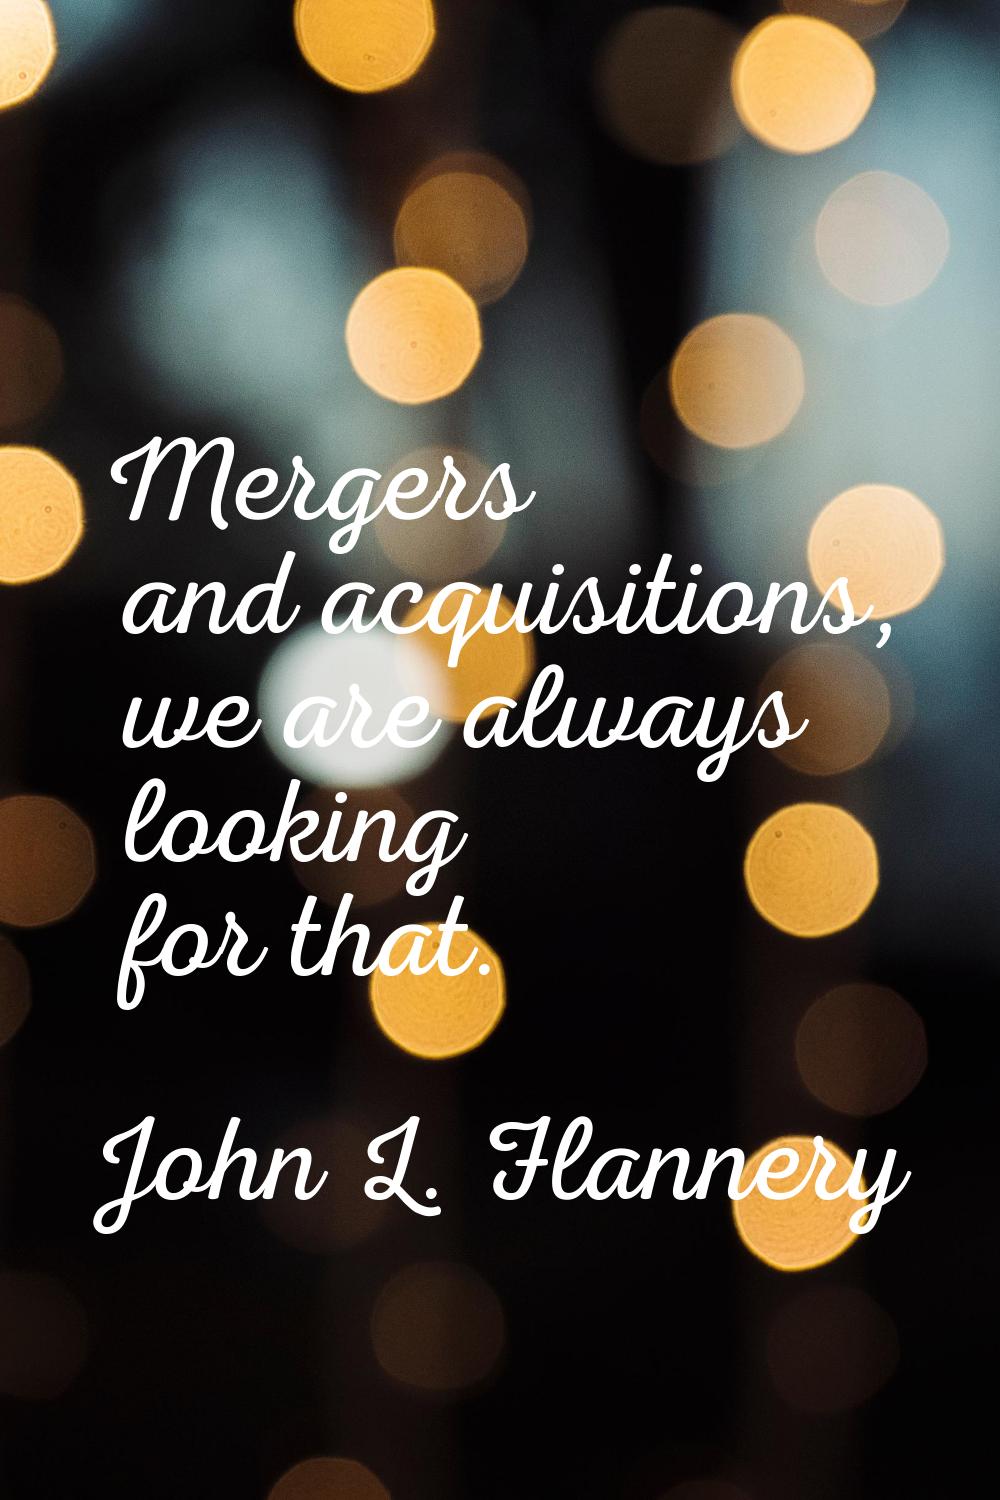 Mergers and acquisitions, we are always looking for that.